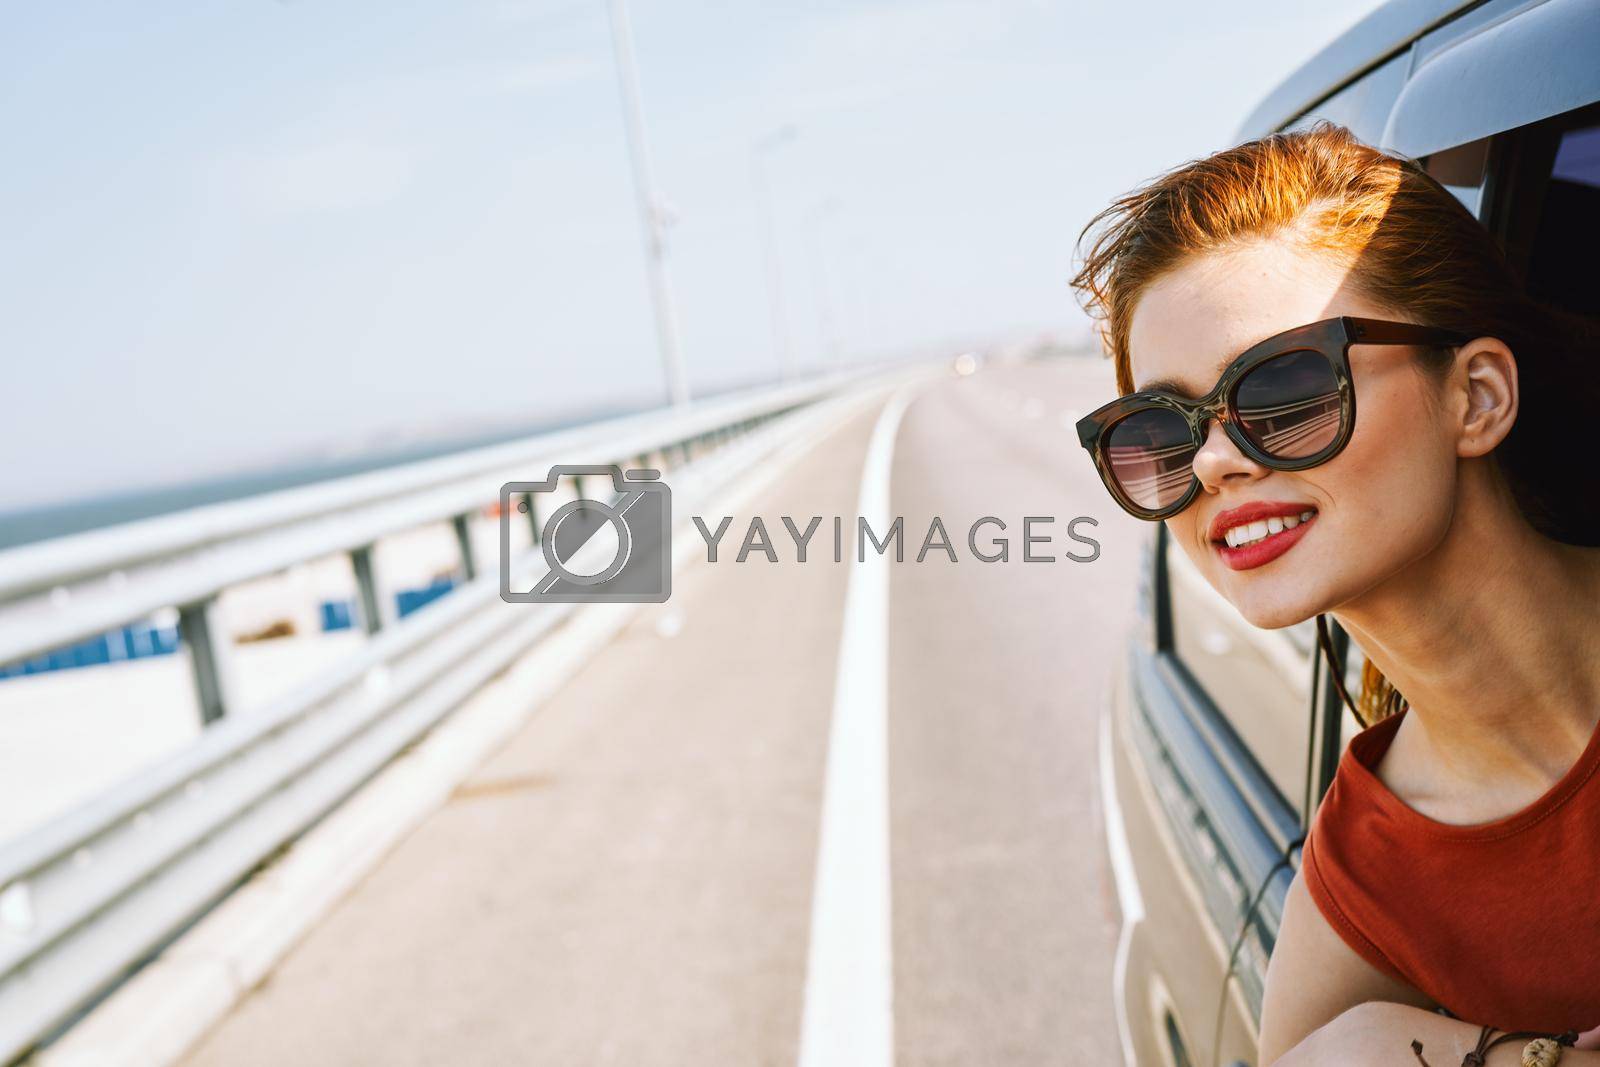 cheerful woman peeking out of the car window trip adventure lifestyle. High quality photo